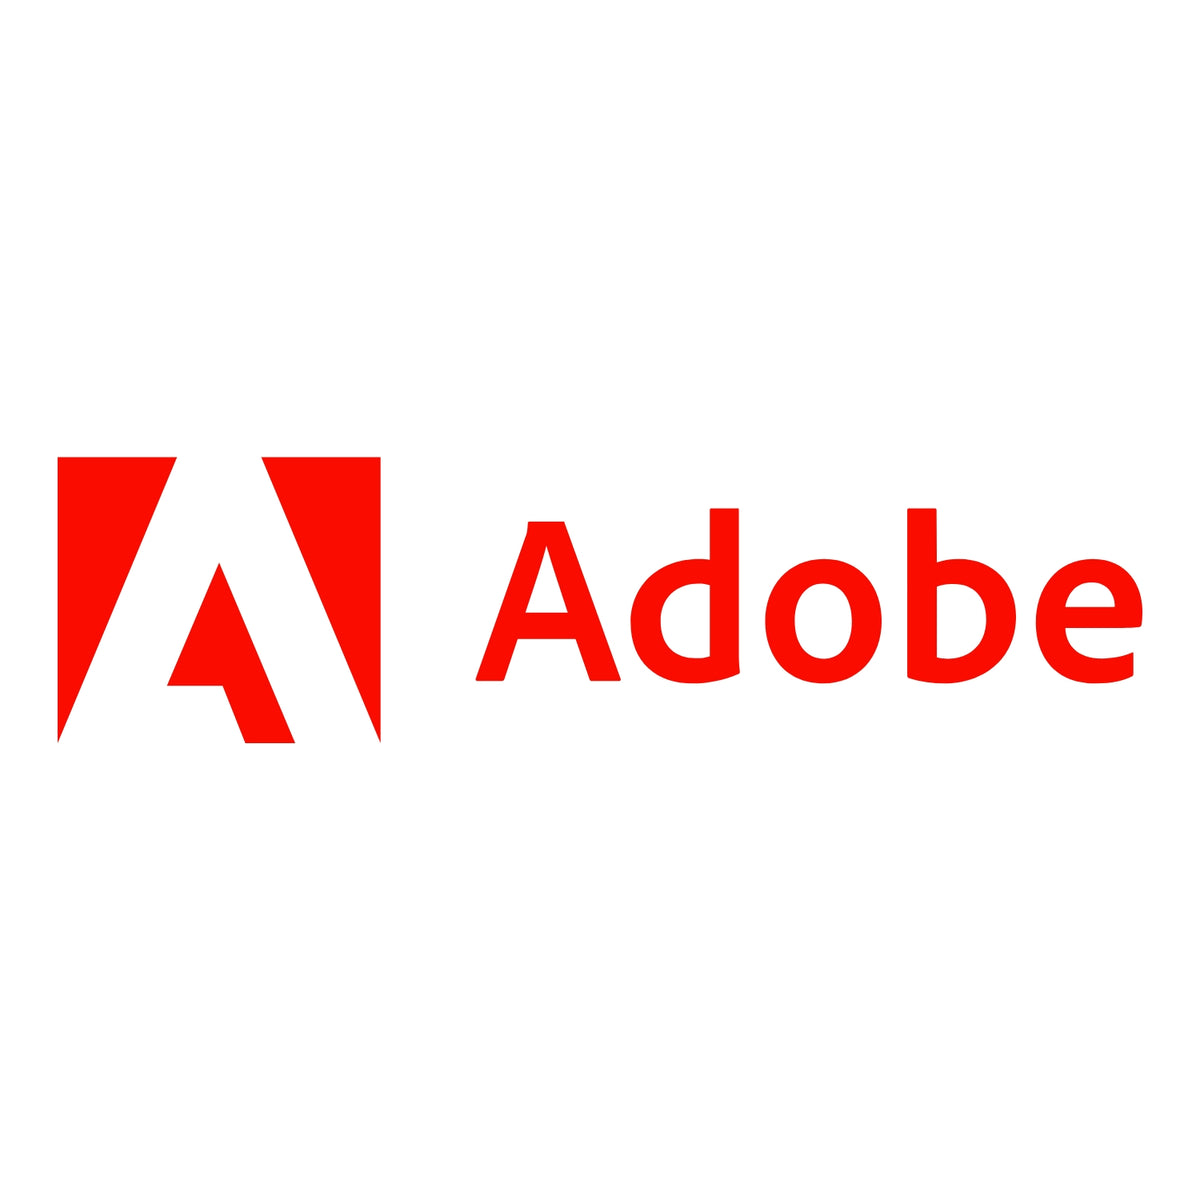 Adobe - Creative, marketing and document management solution software